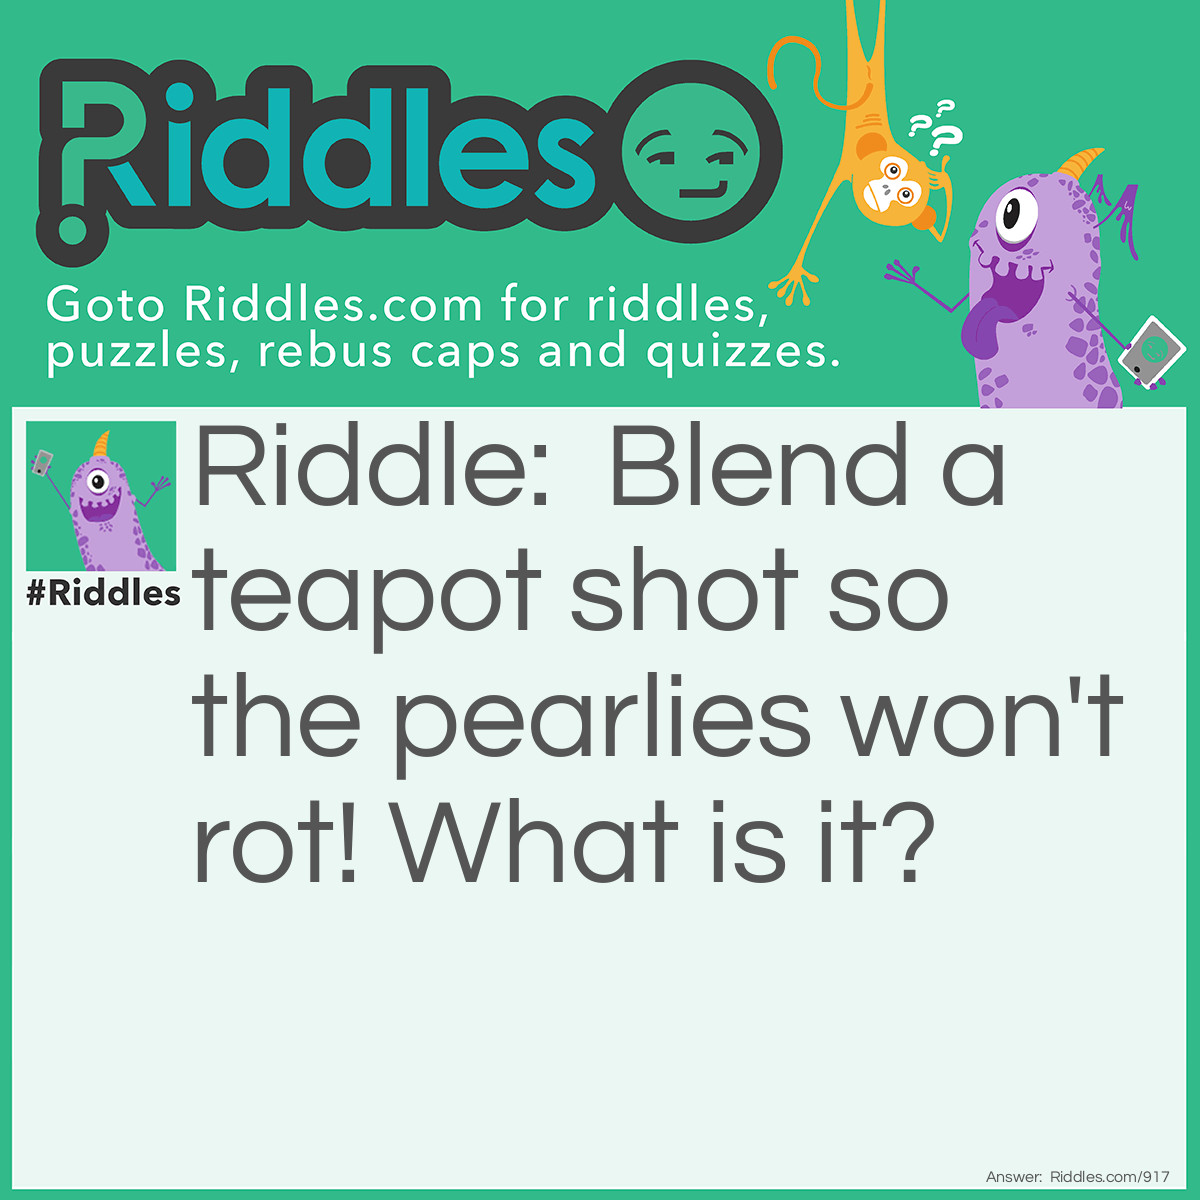 Riddle: Blend a teapot shot so the pearlies won't rot! What is it? Answer: Toothpaste!